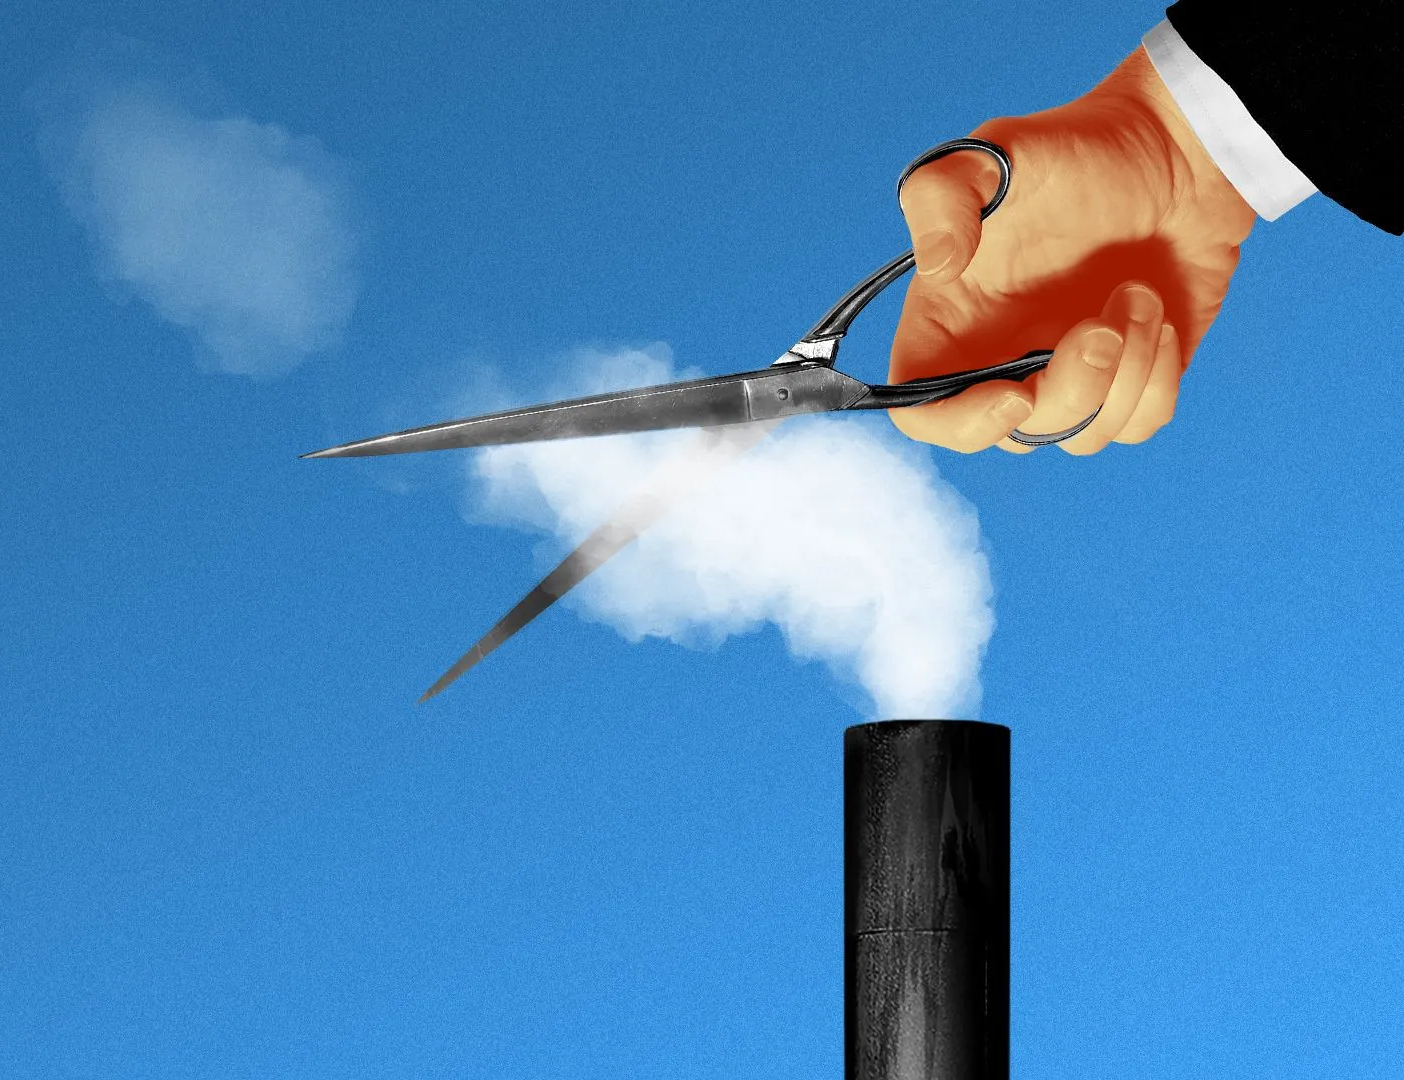  Illustration of a hand holding scissors cutting the smoke emitted from a smoke stack into small puffs. Credit: Sarah Grillo/Axios